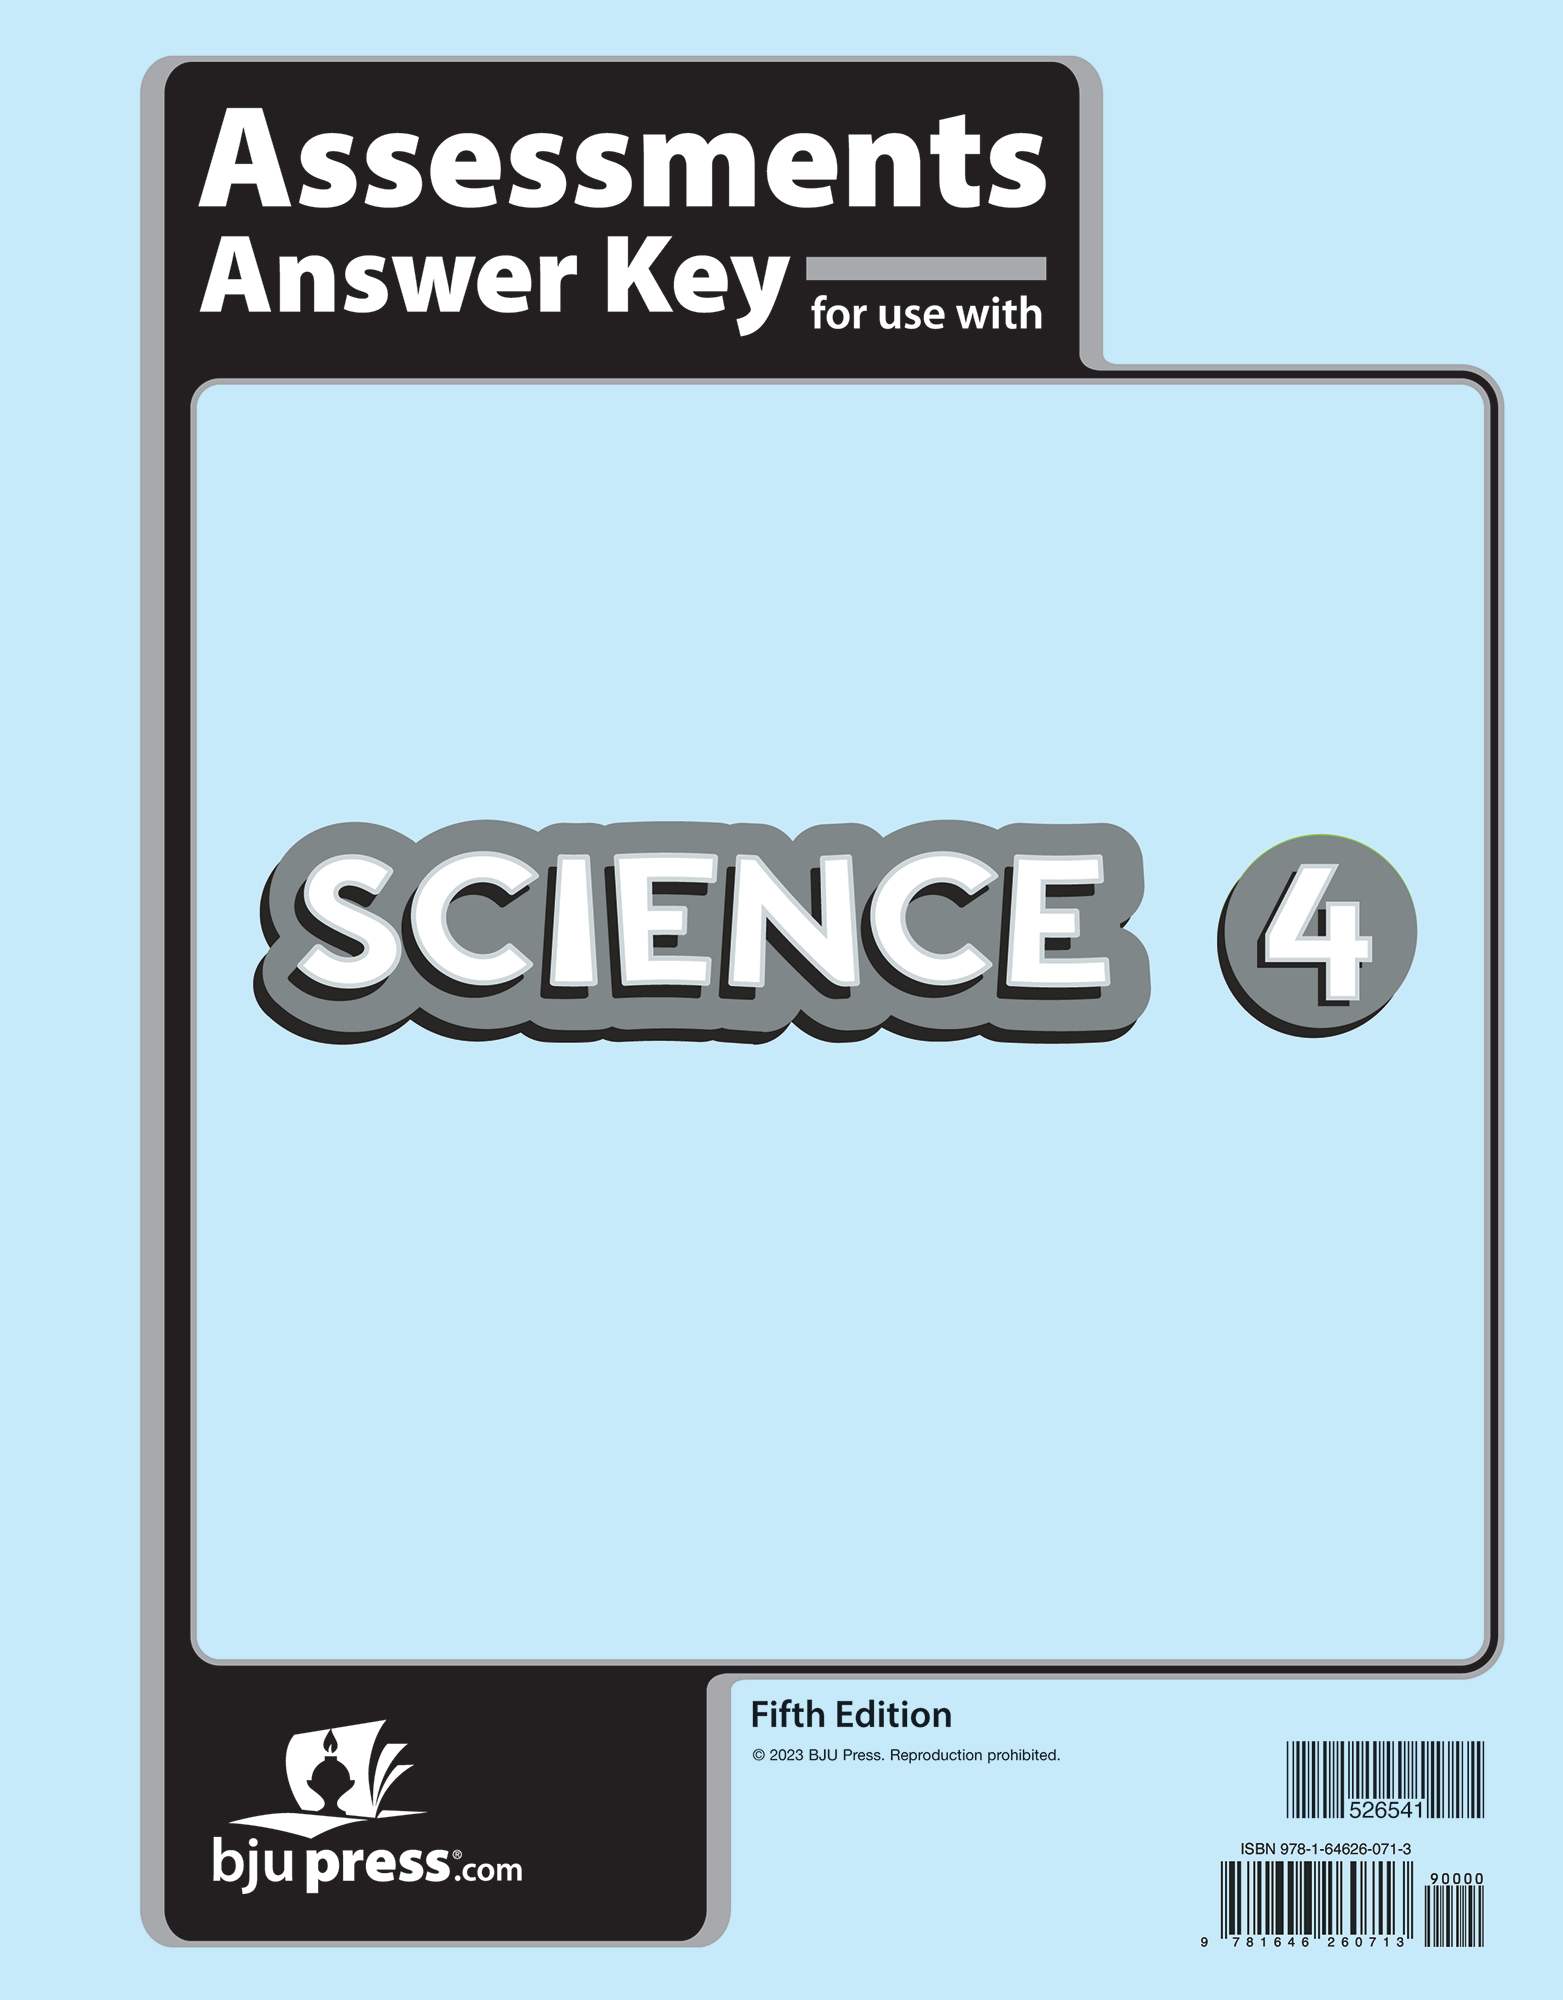 Science 4 Assessments Answer Key, 5th ed.